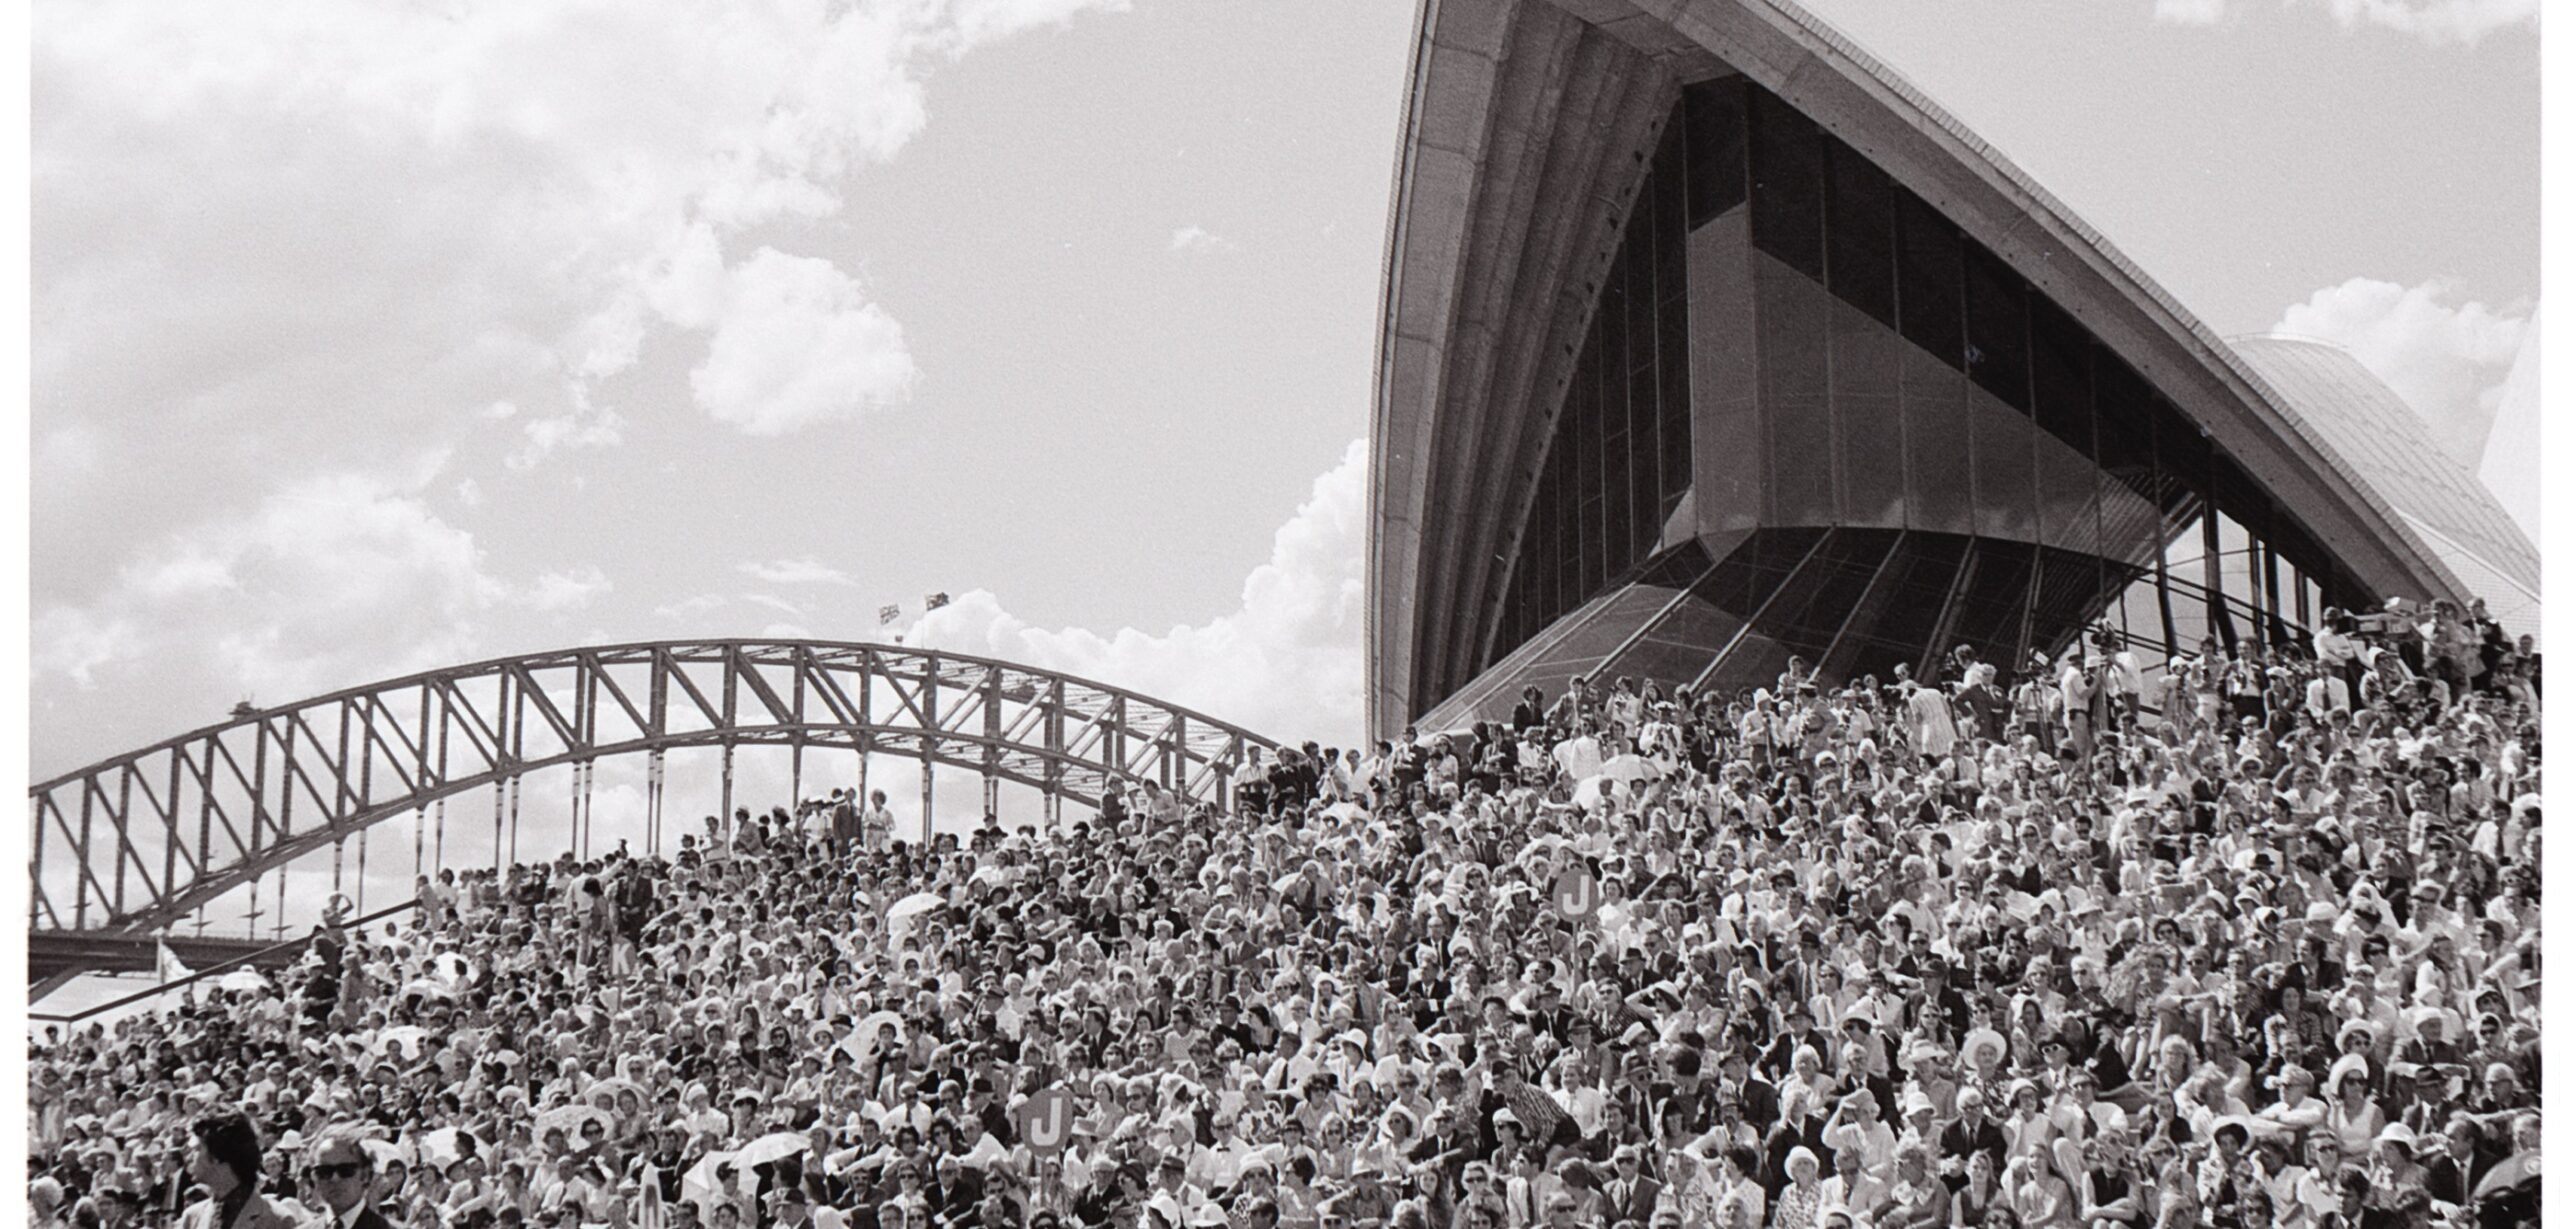 Interactive exhibition honours 50 years of the Sydney Opera House